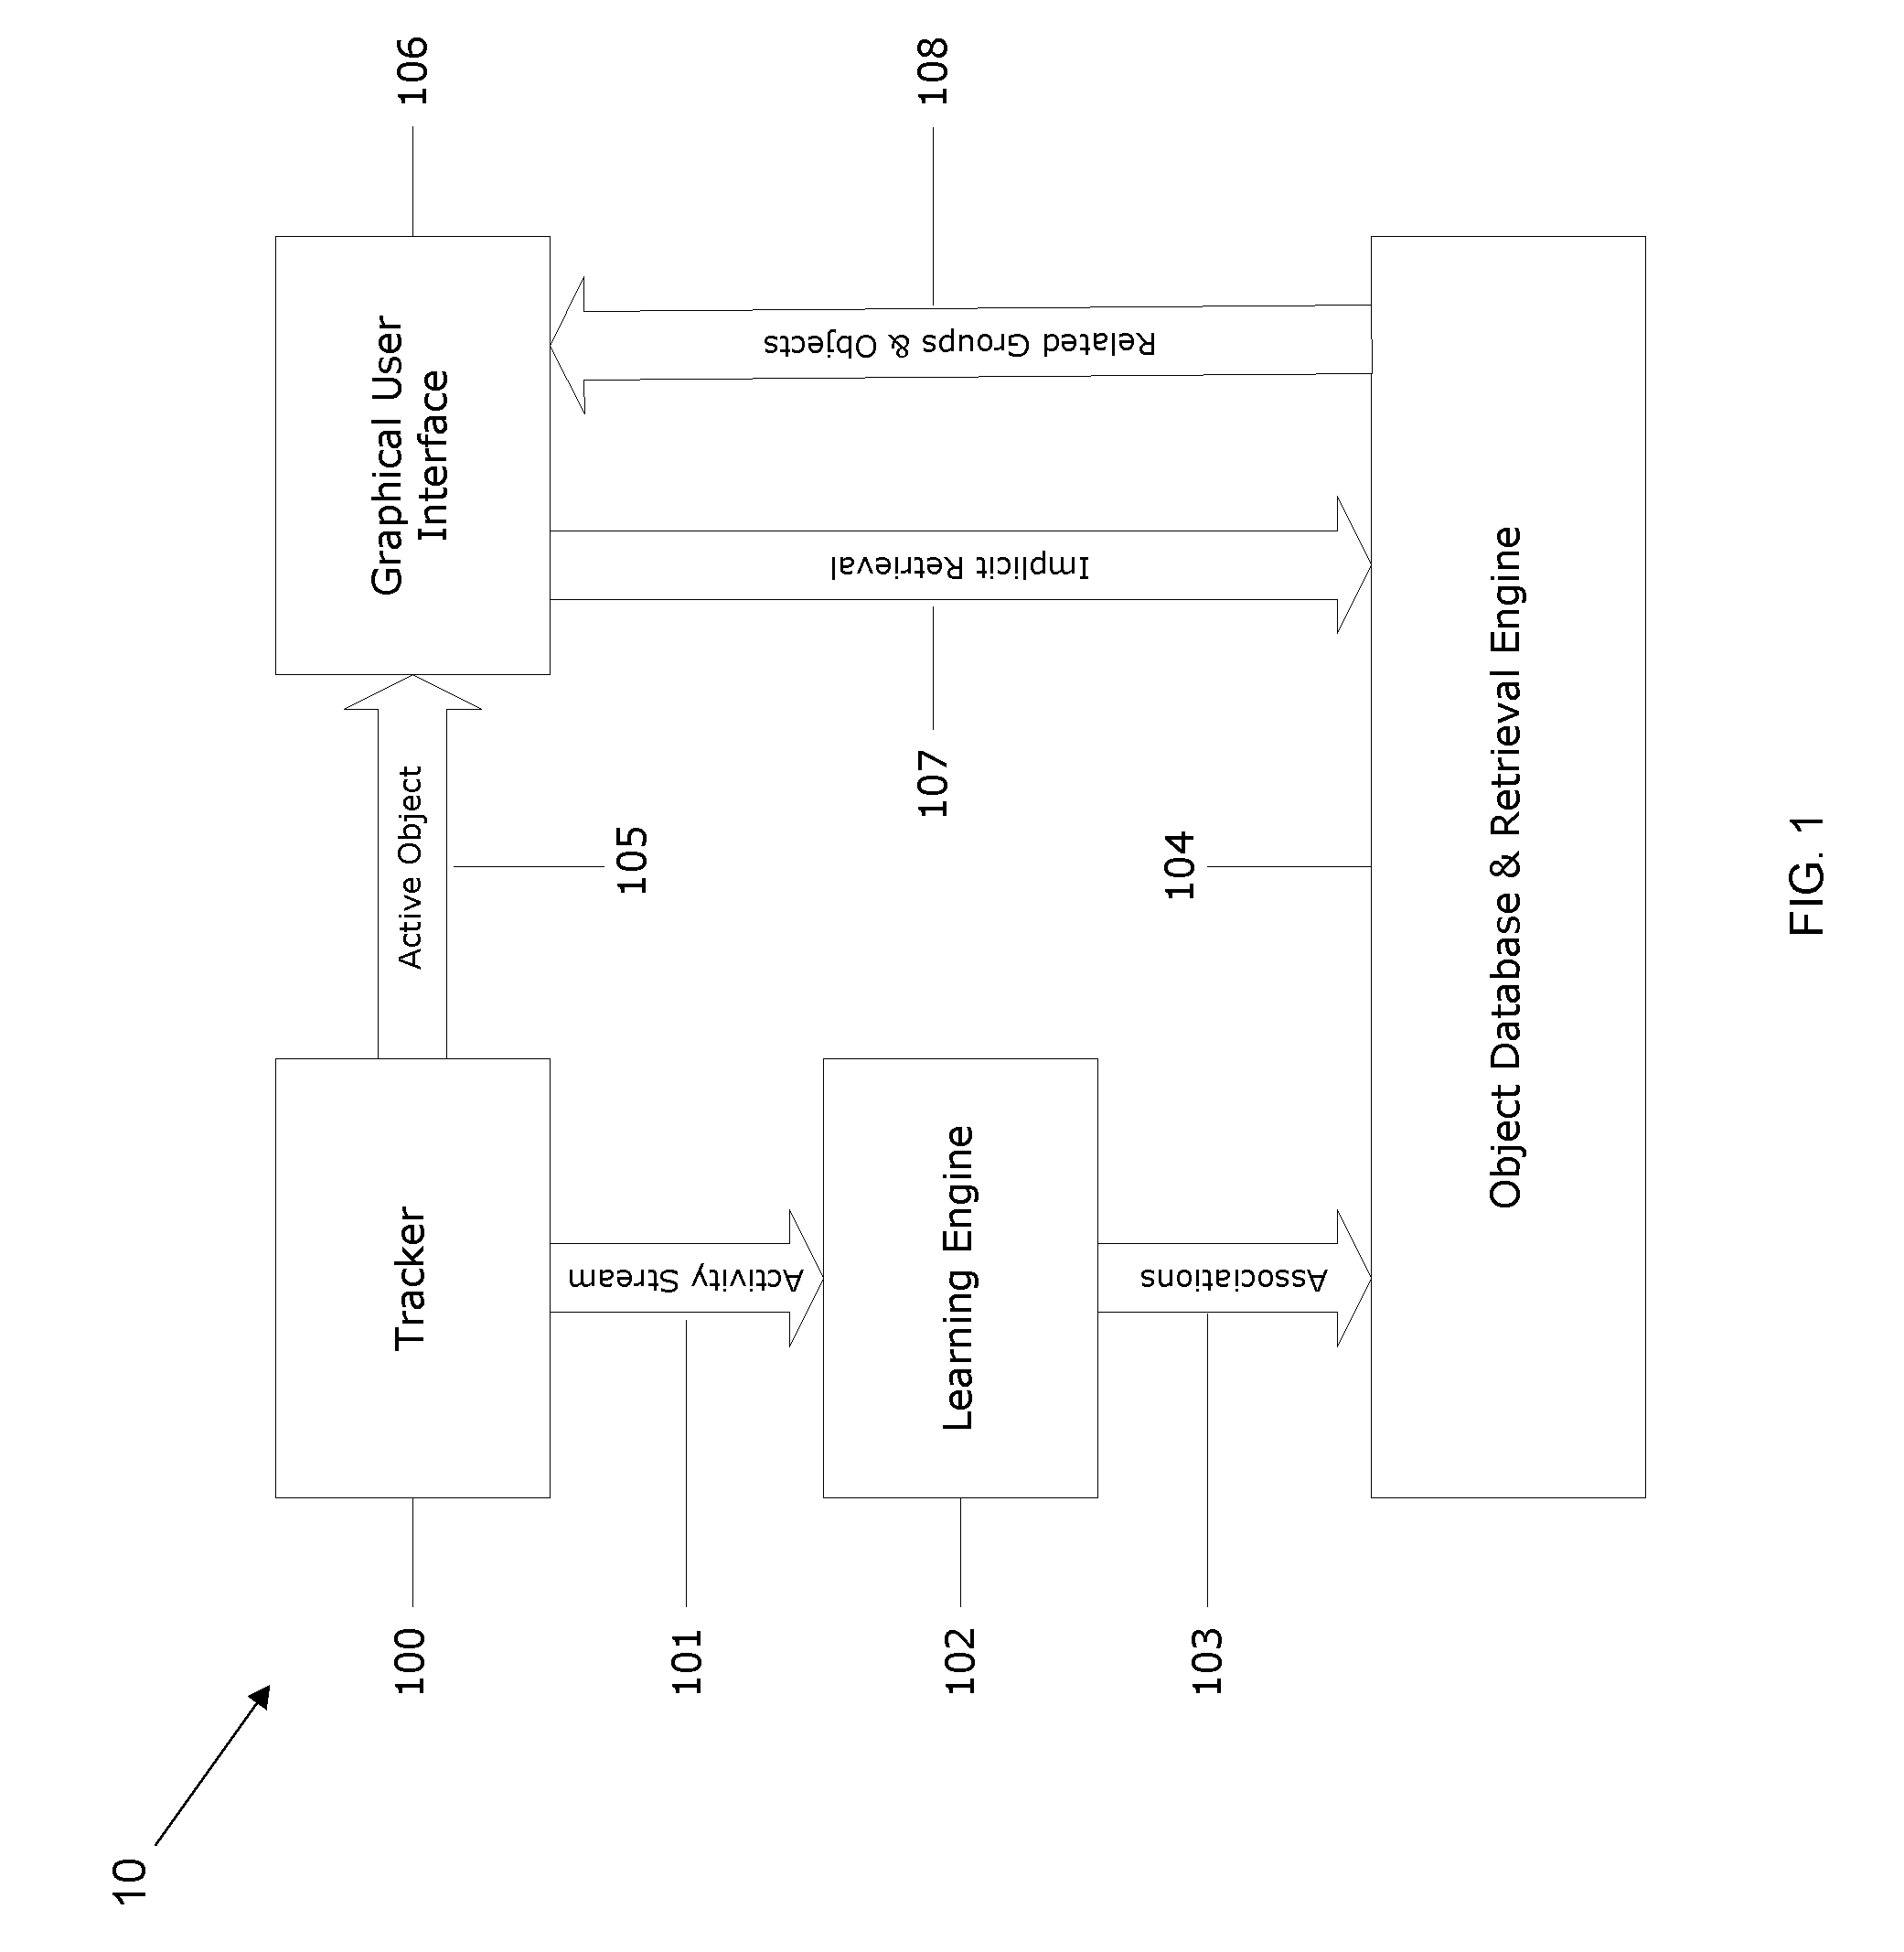 System and method for learning associations between logical objects and determining relevance based upon user activity